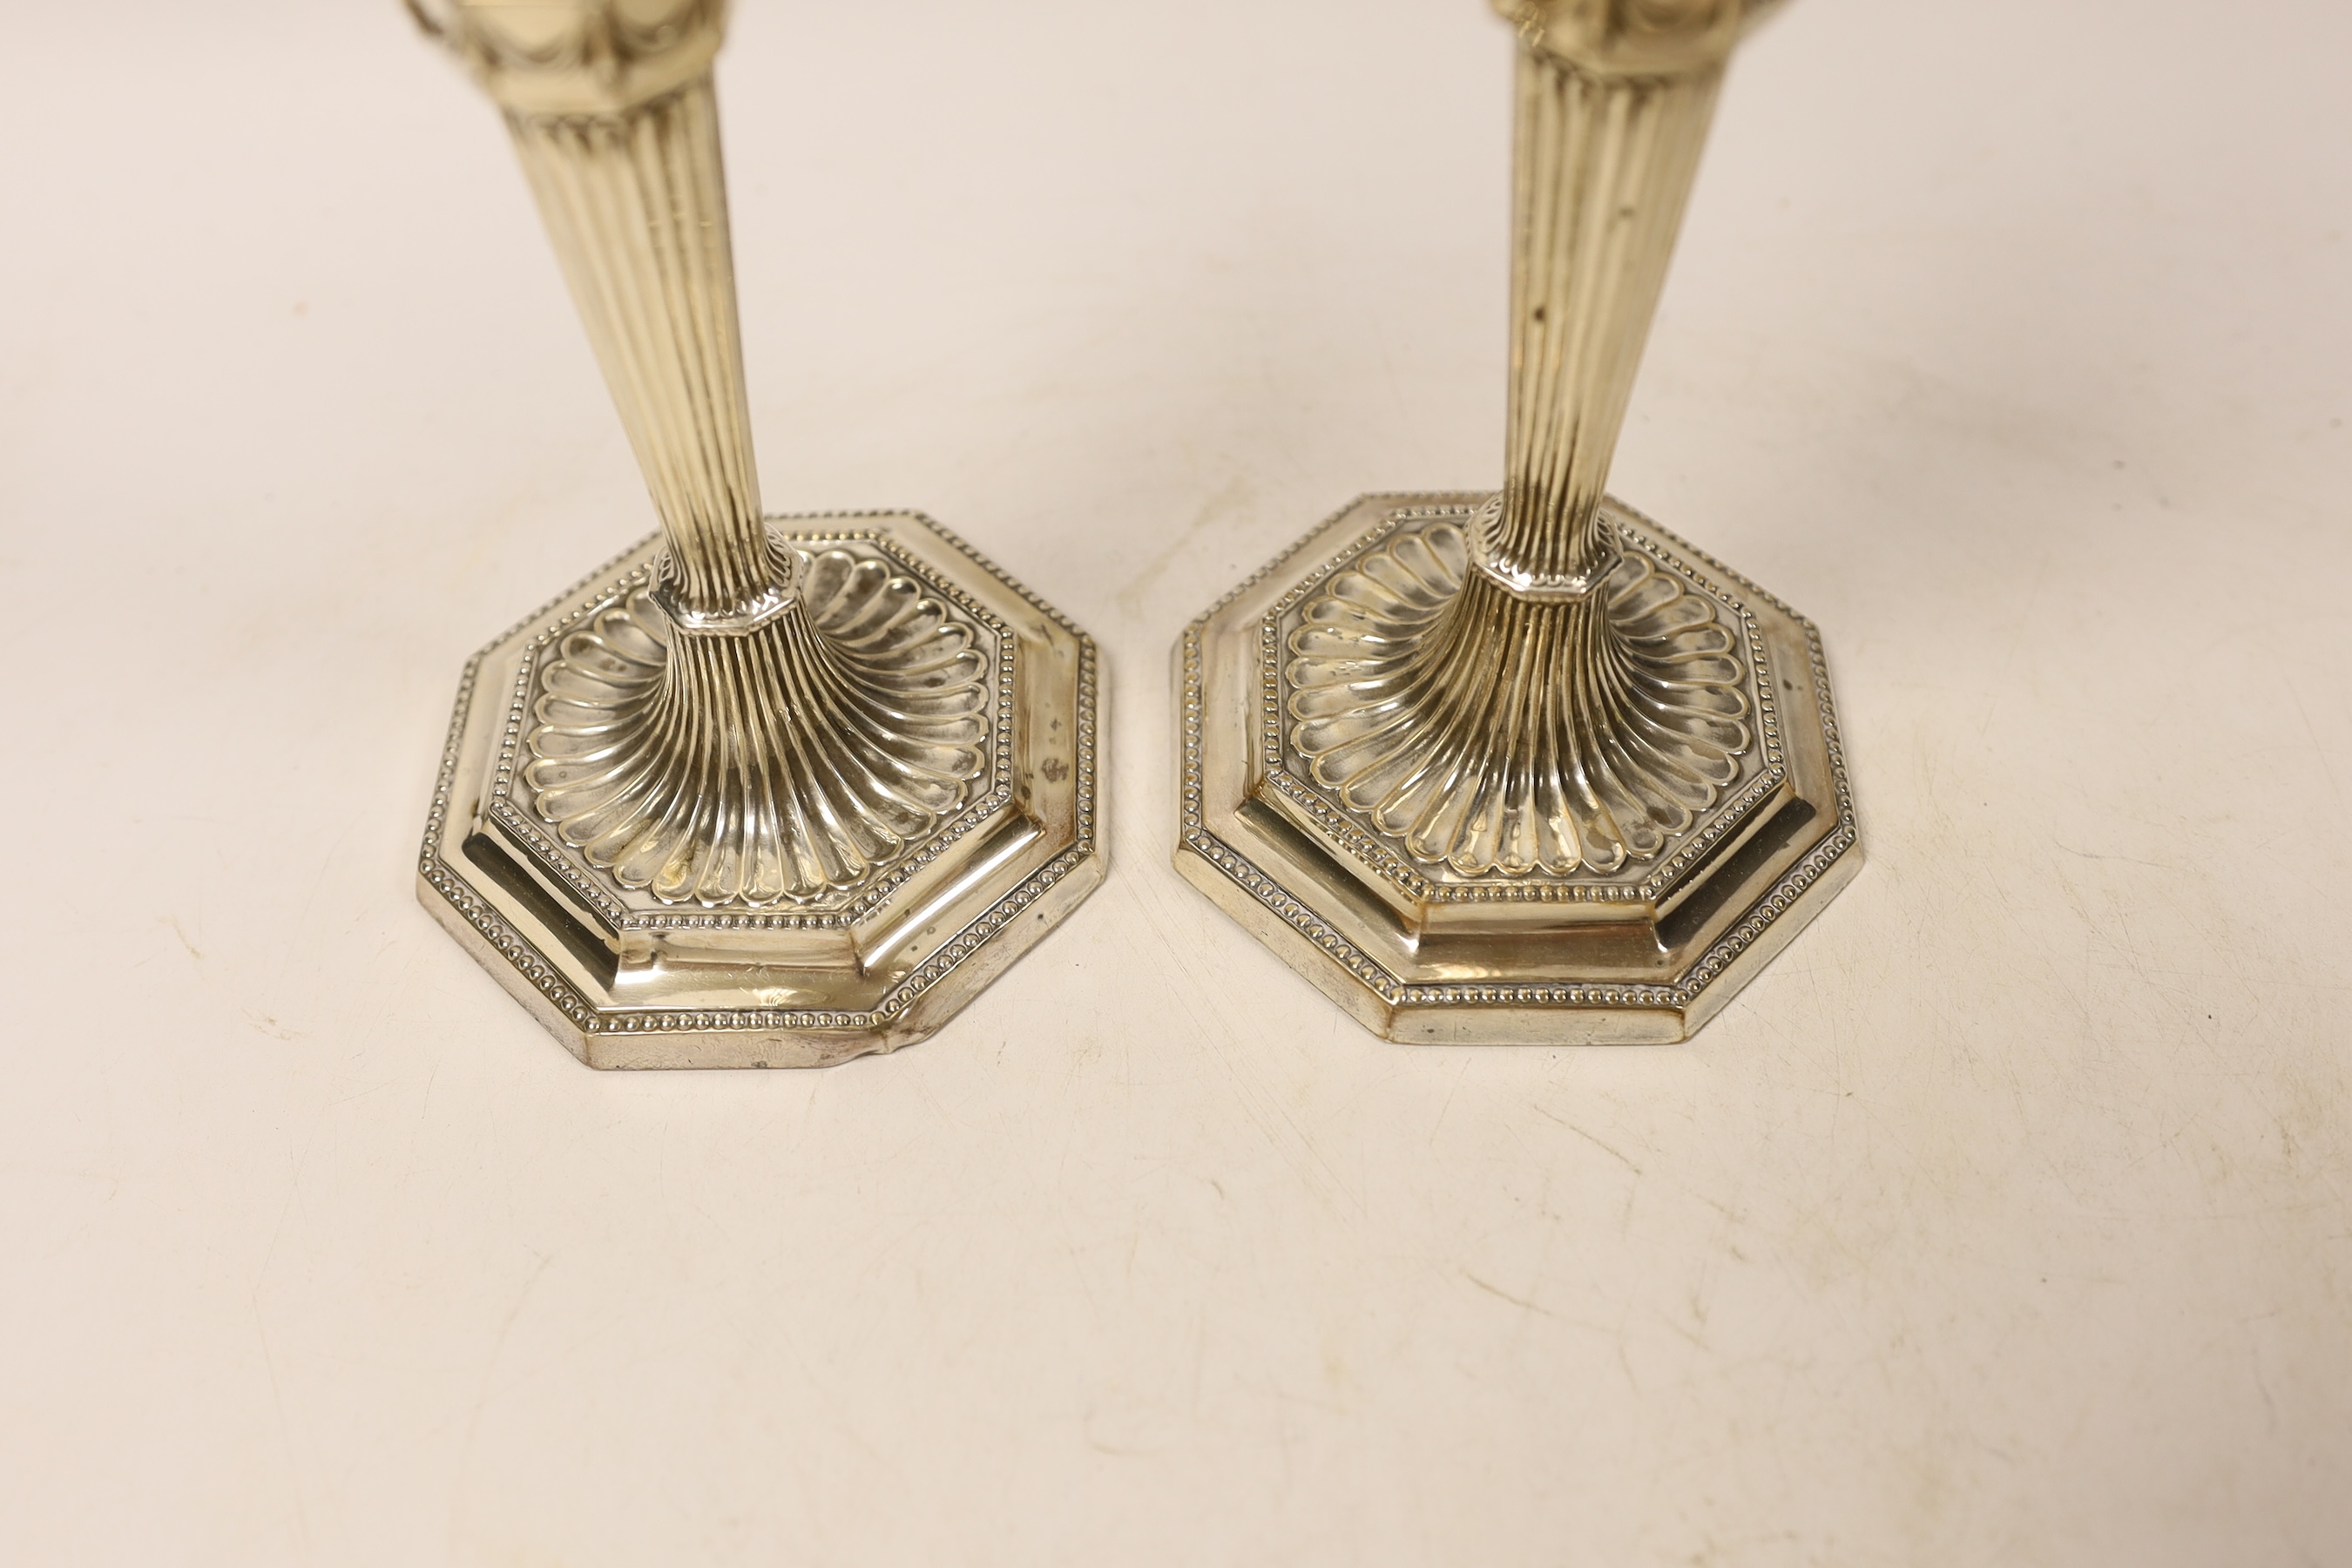 A pair of George V silver mounted candlesticks, on octagonal bases, Mappin & Webb, Sheffield, 1929, 20.9cm, weighted.